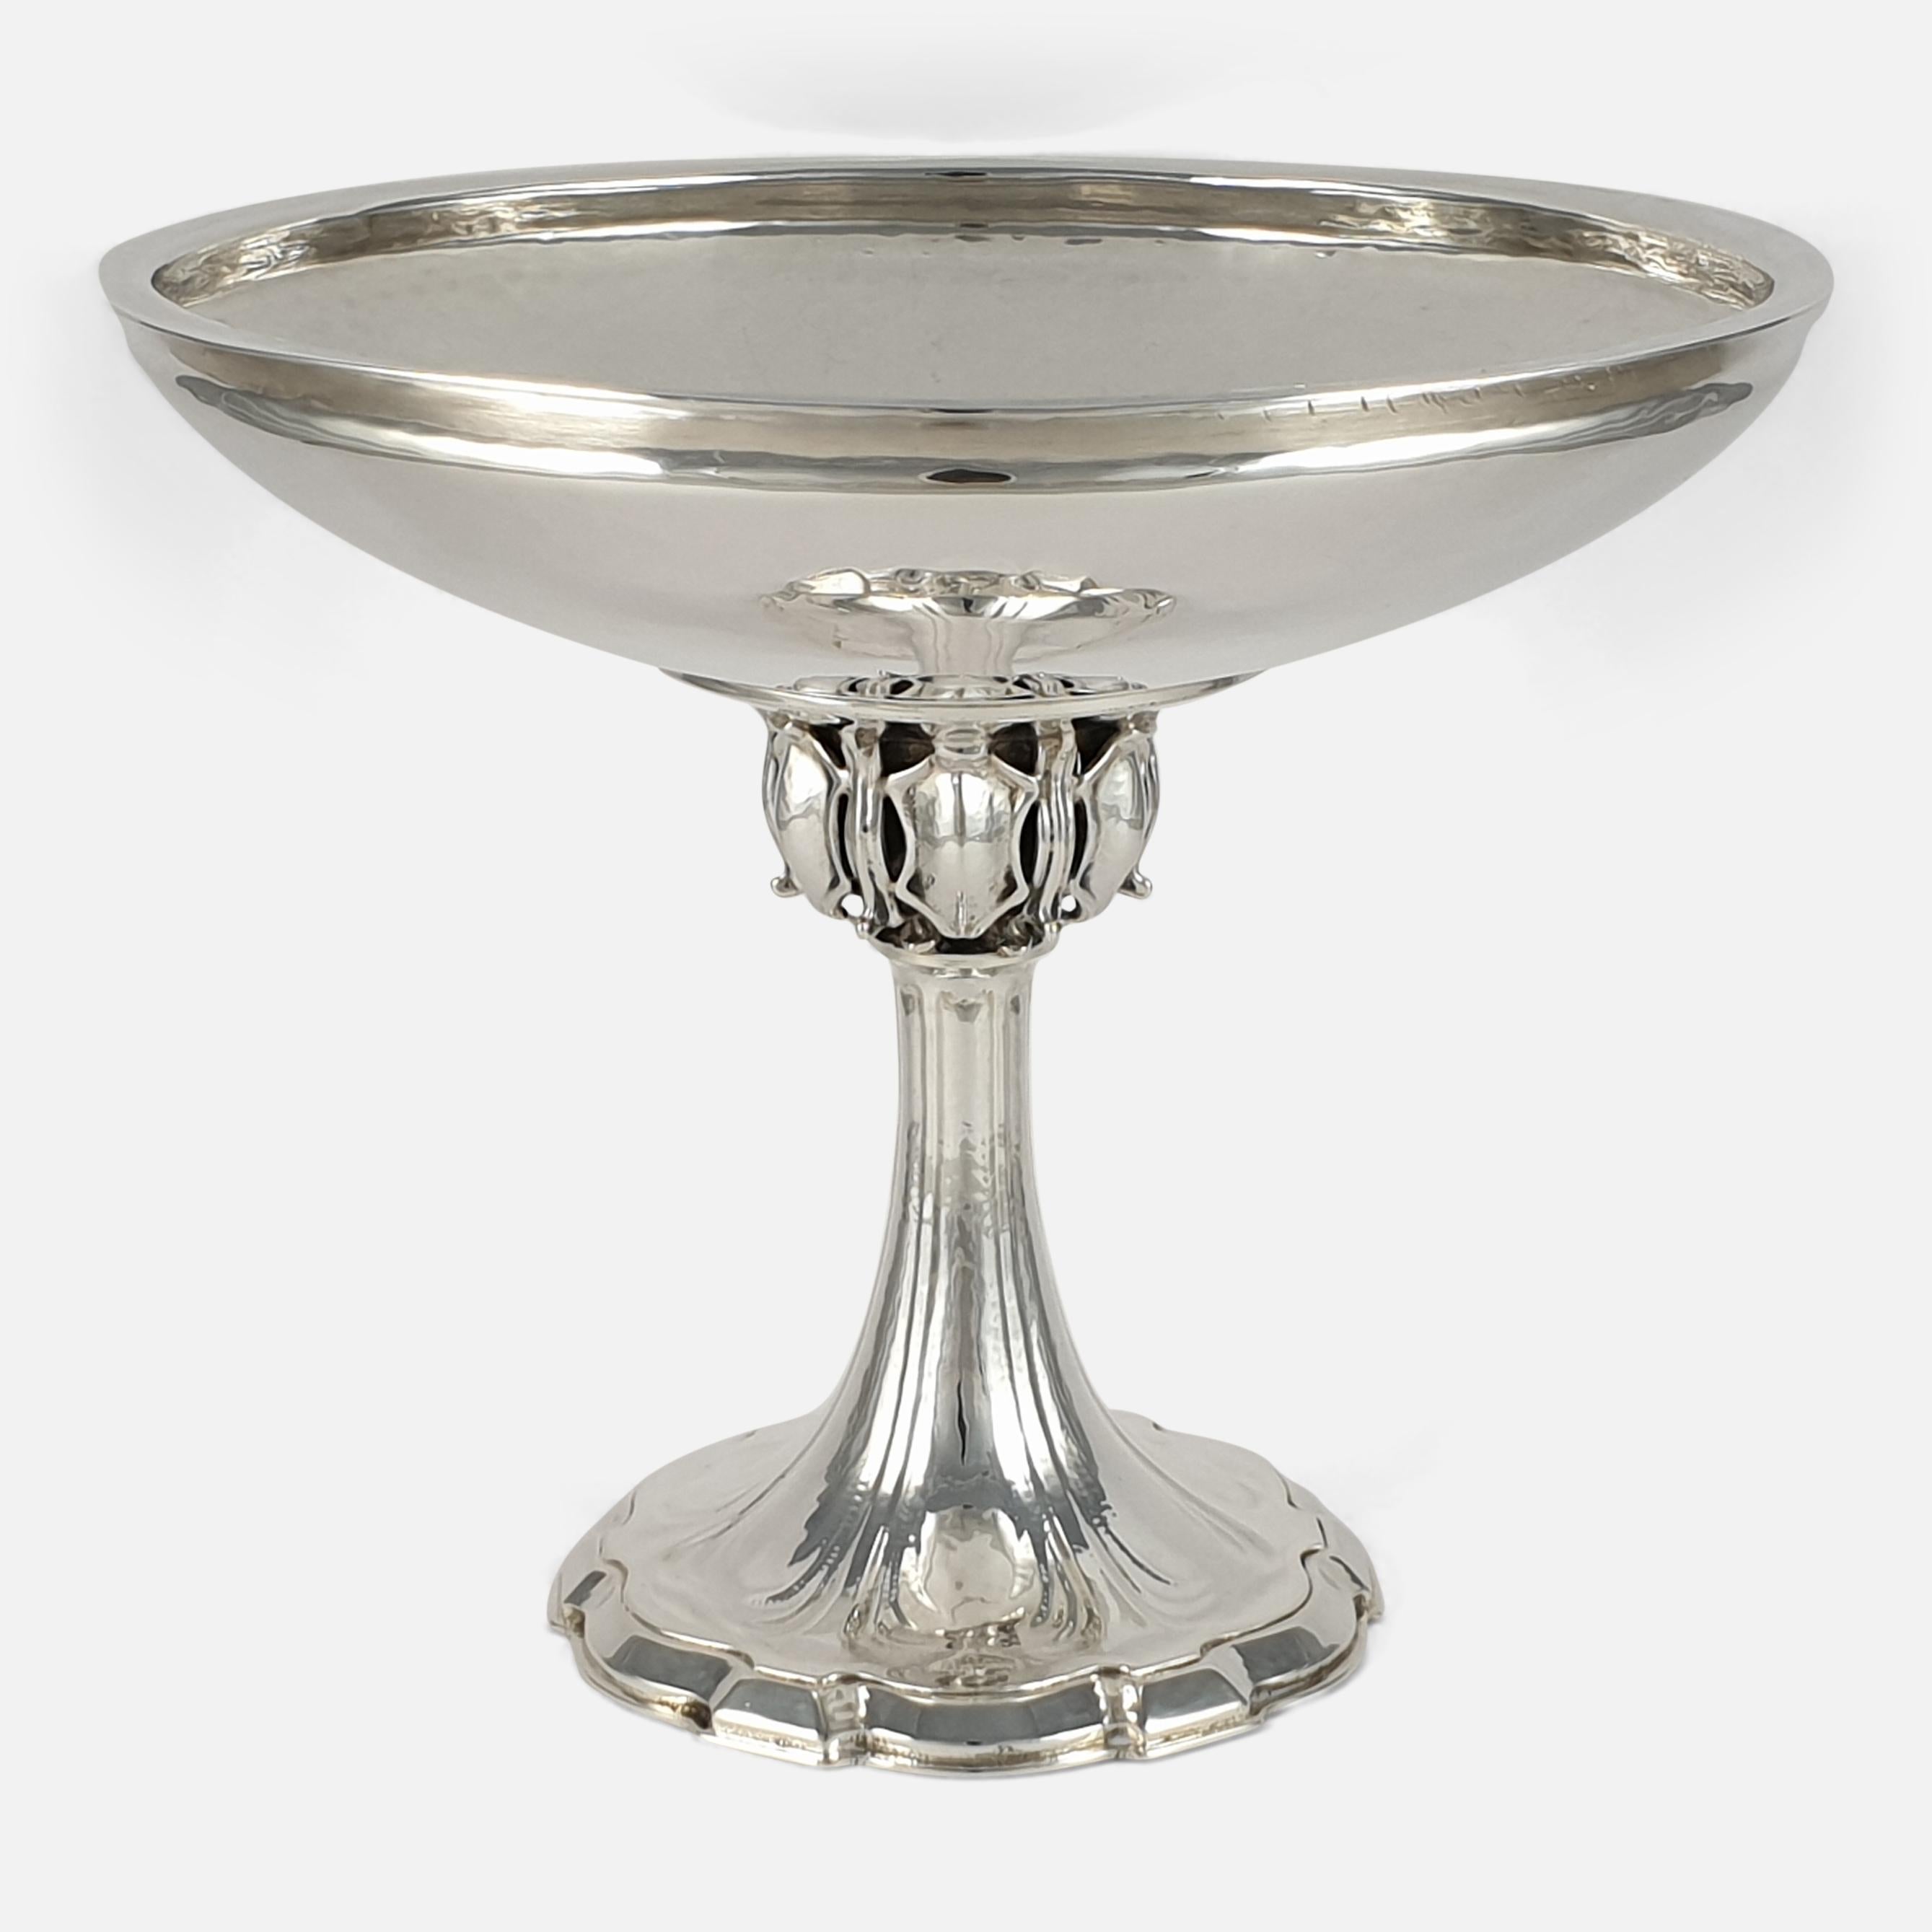 An Arts & Crafts style sterling silver Tazza made by Omar Ramsden. The Tazza has a circular tapering bowl, having spot-hammered decoration, on a cast baluster stem with pierced shields and scroll motifs, sitting on a spread shaped circular foot. It